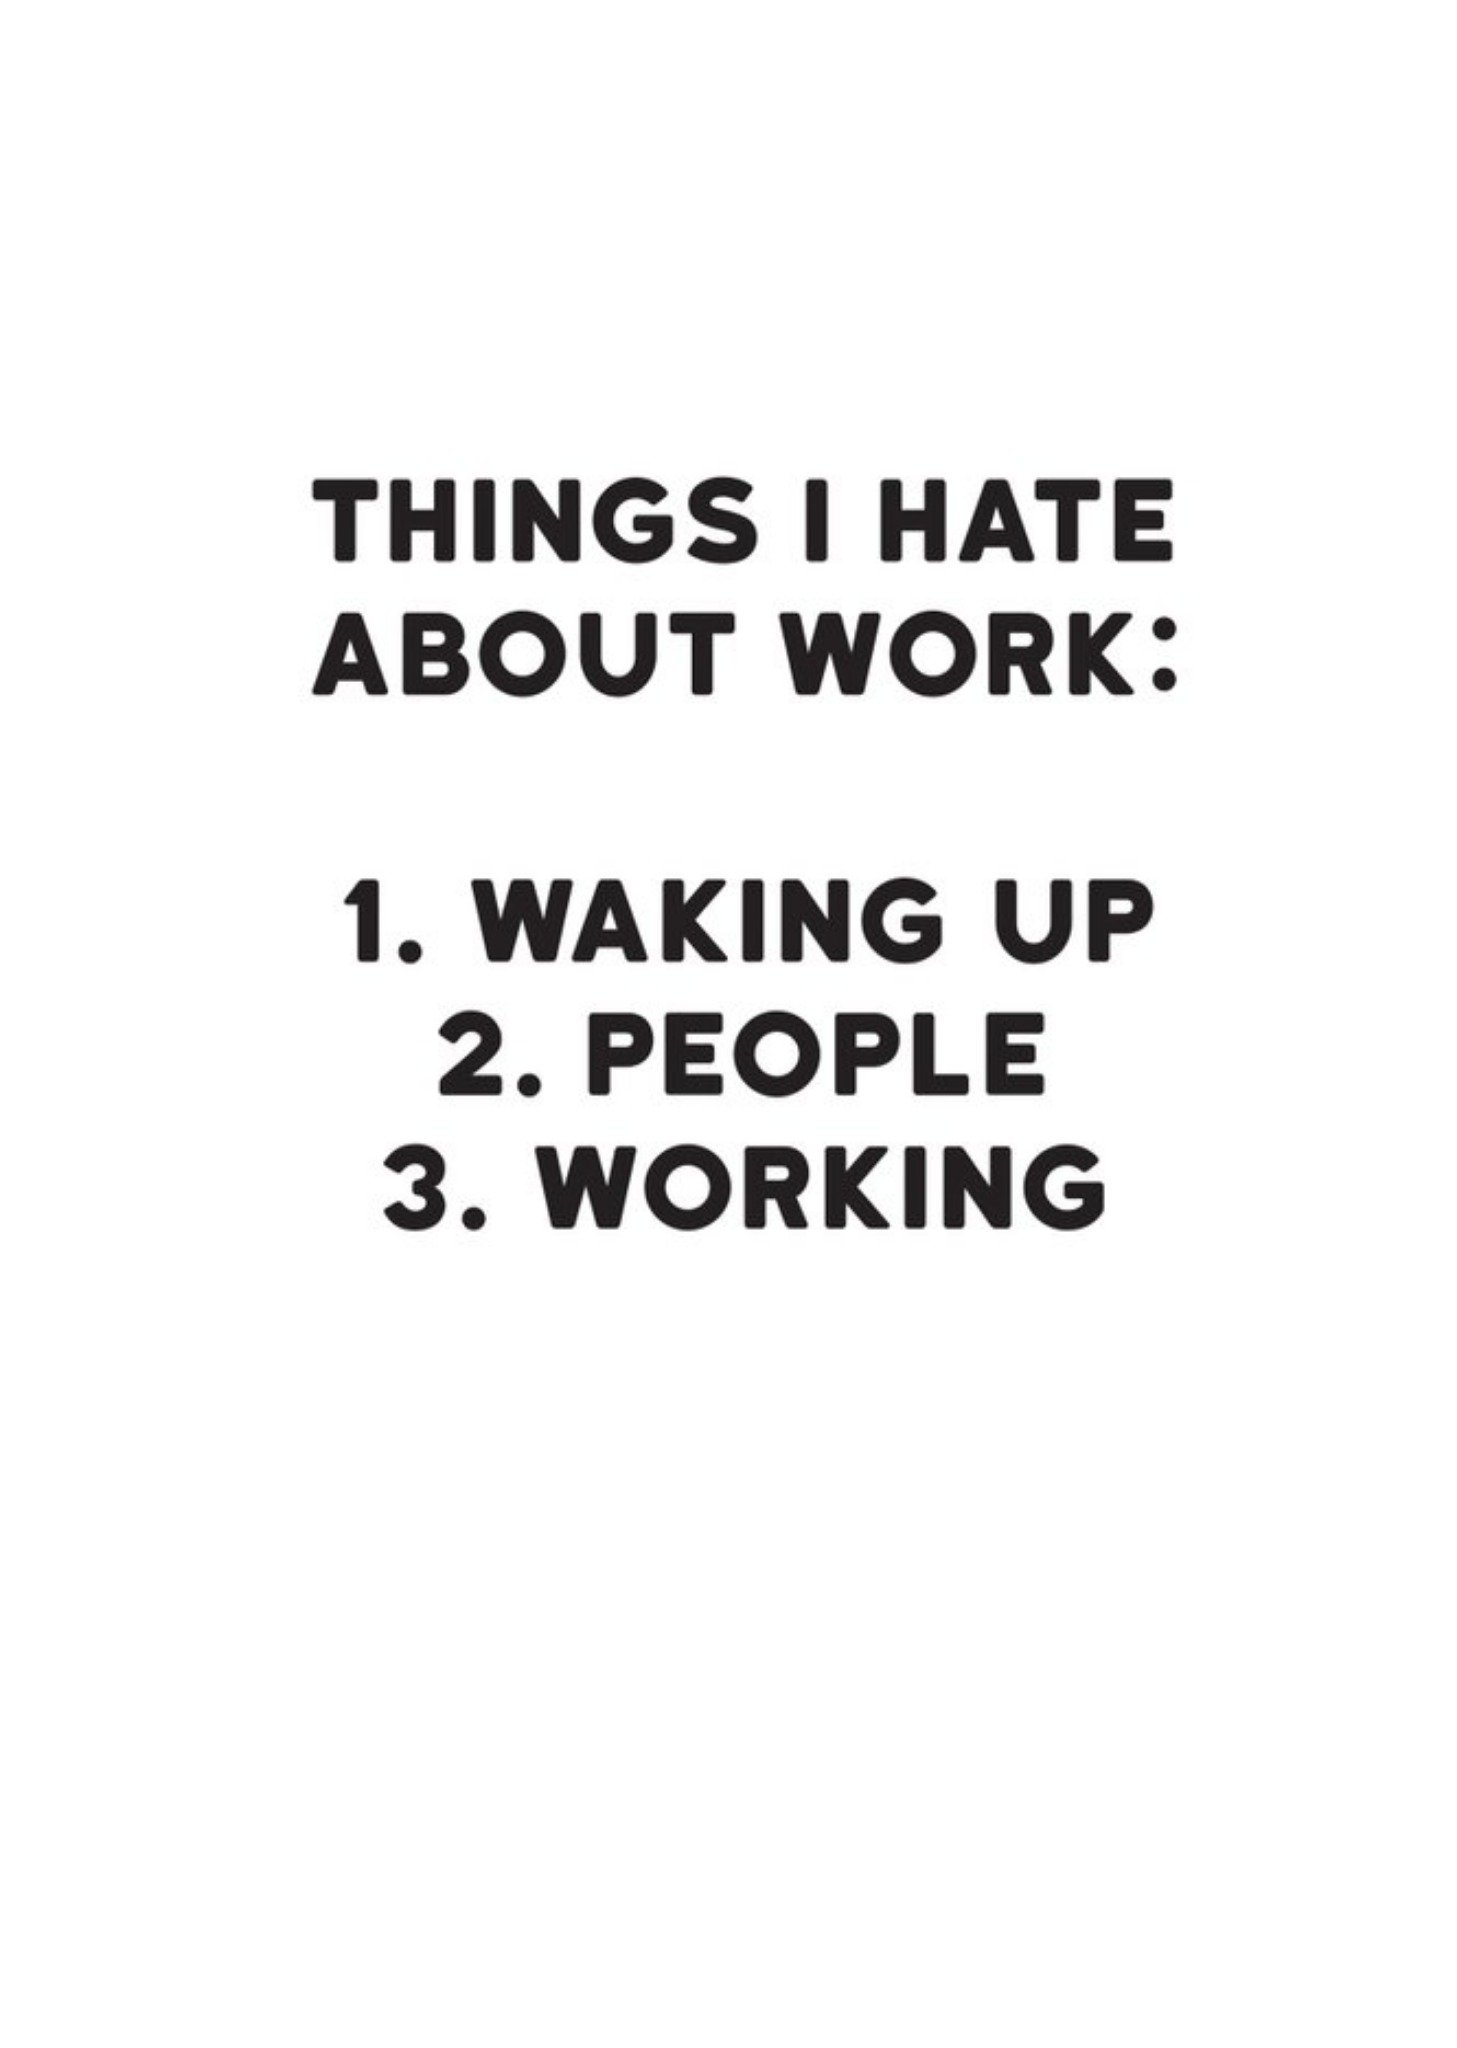 Moonpig Modern Funny Typographical Things I Hate About Work Card Ecard